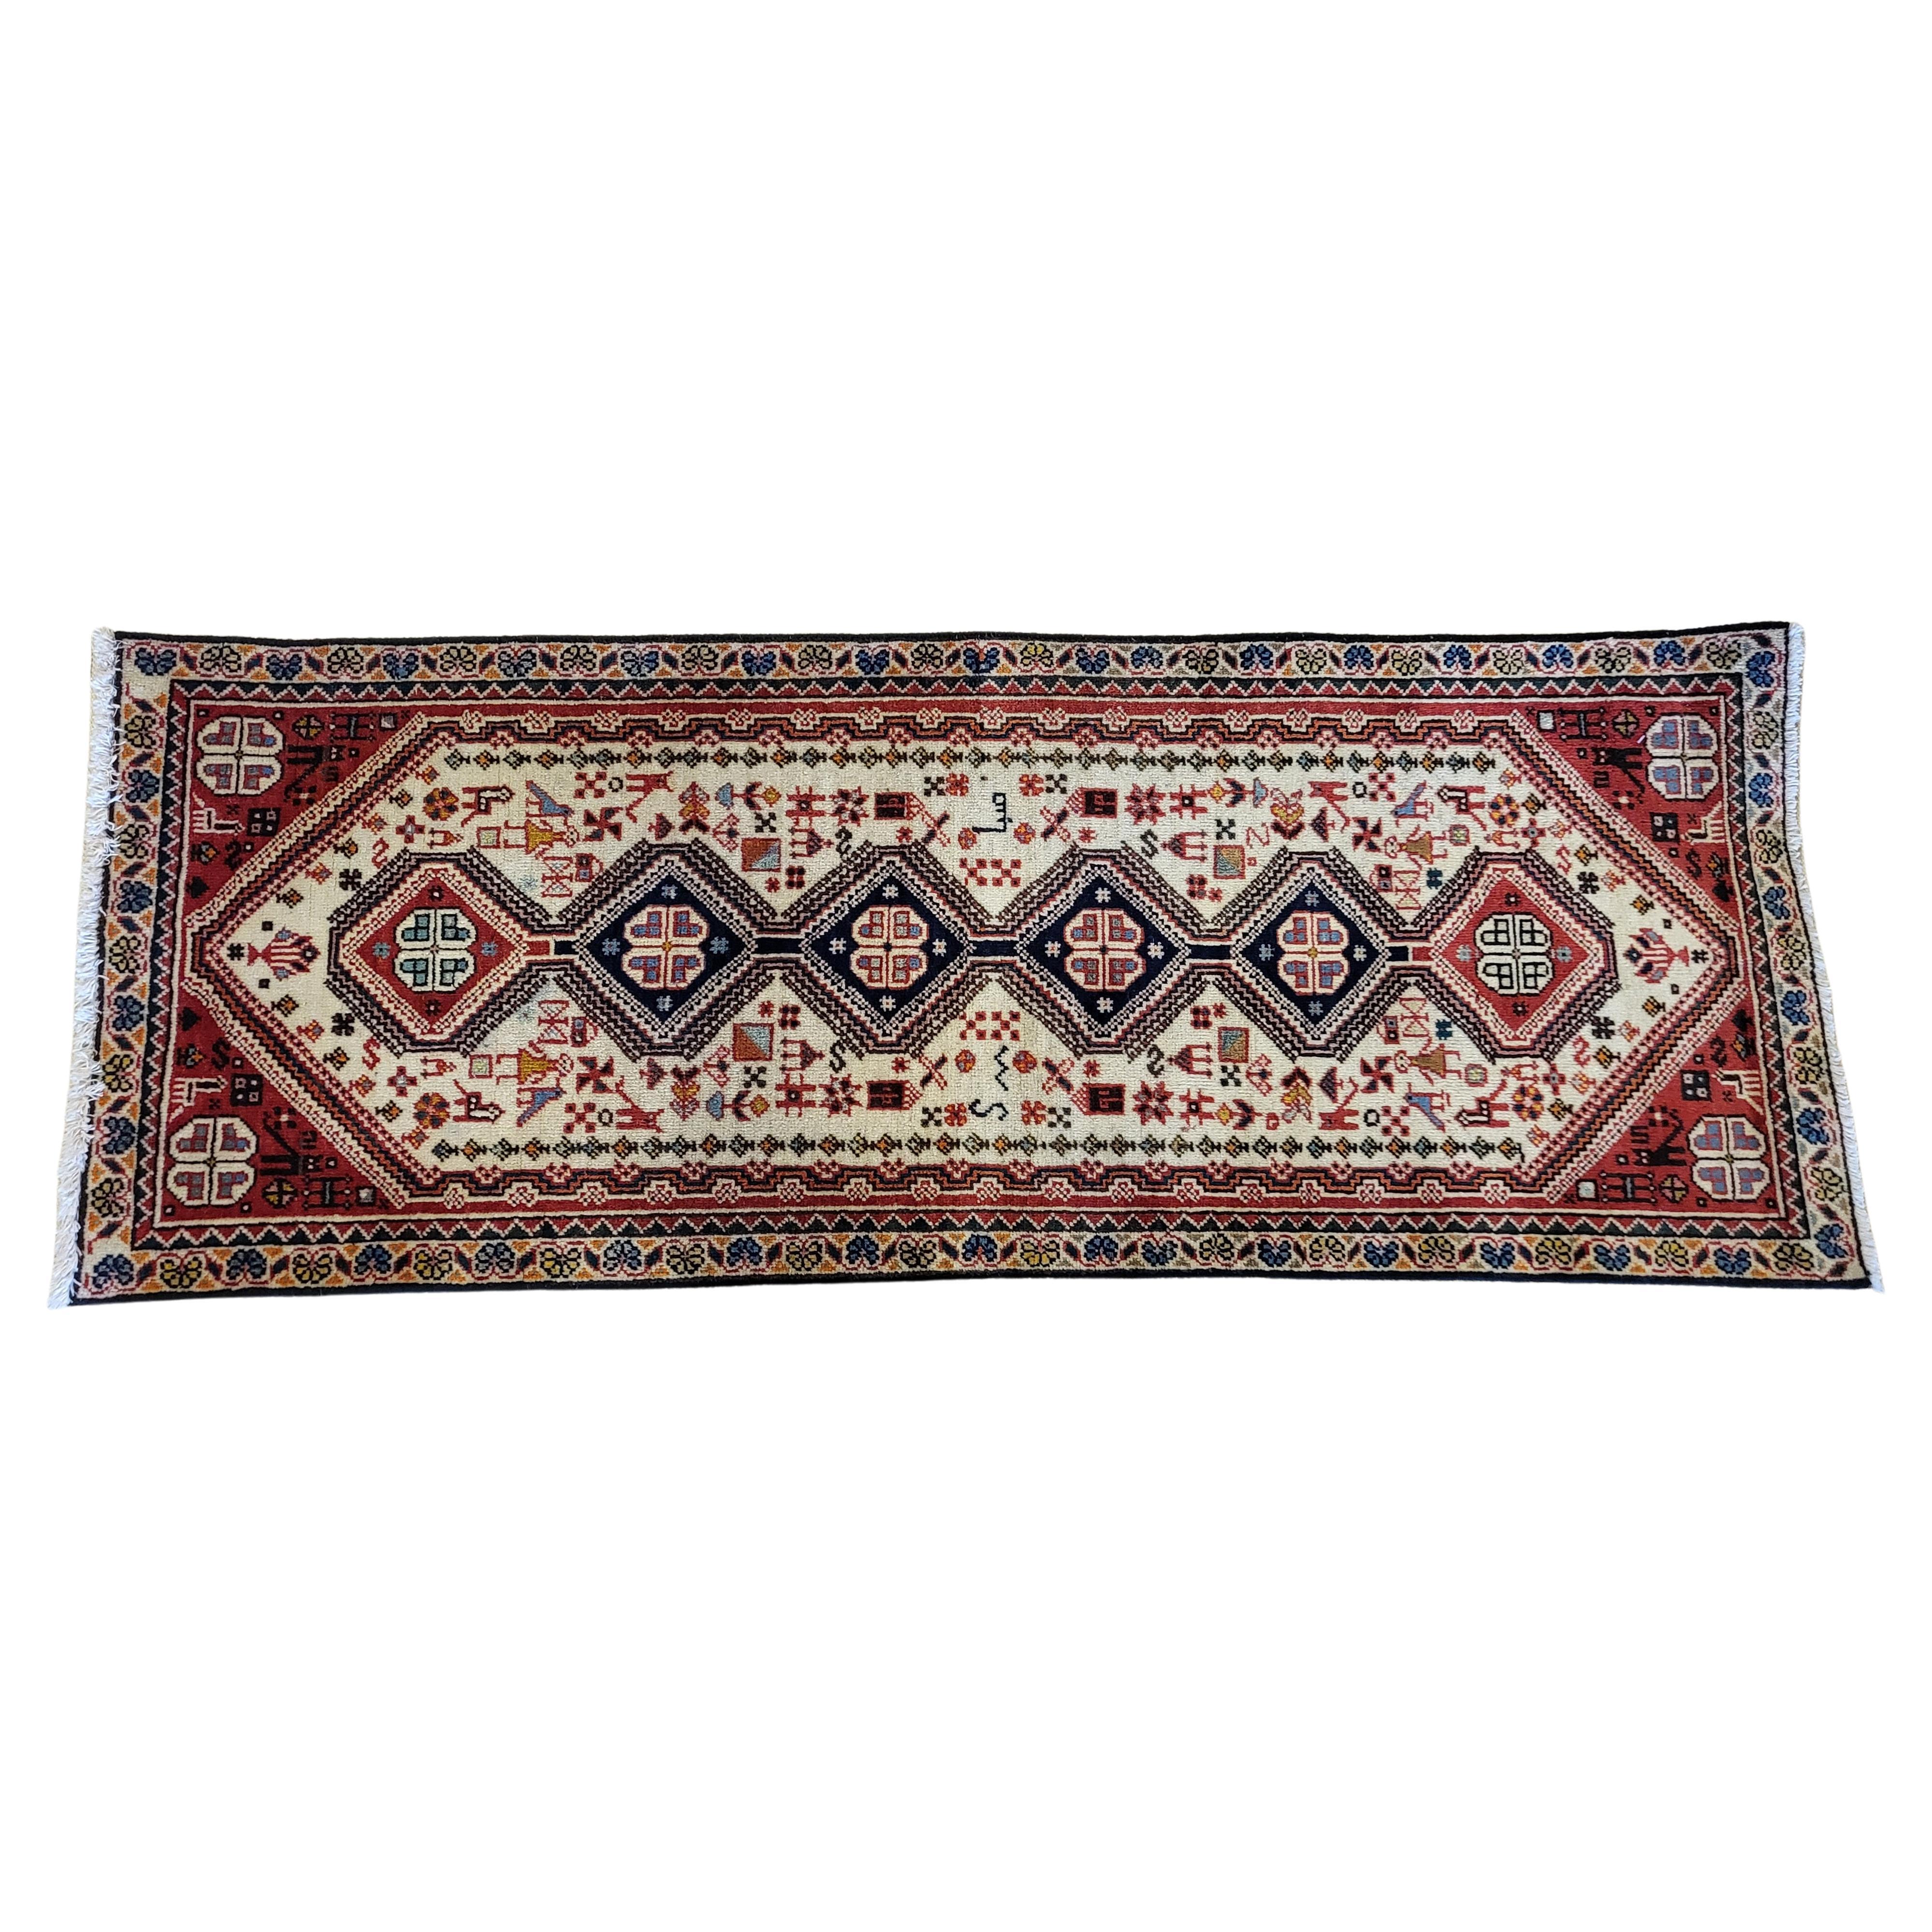 Signed Antique Abadeh - Persian Tribal Runner